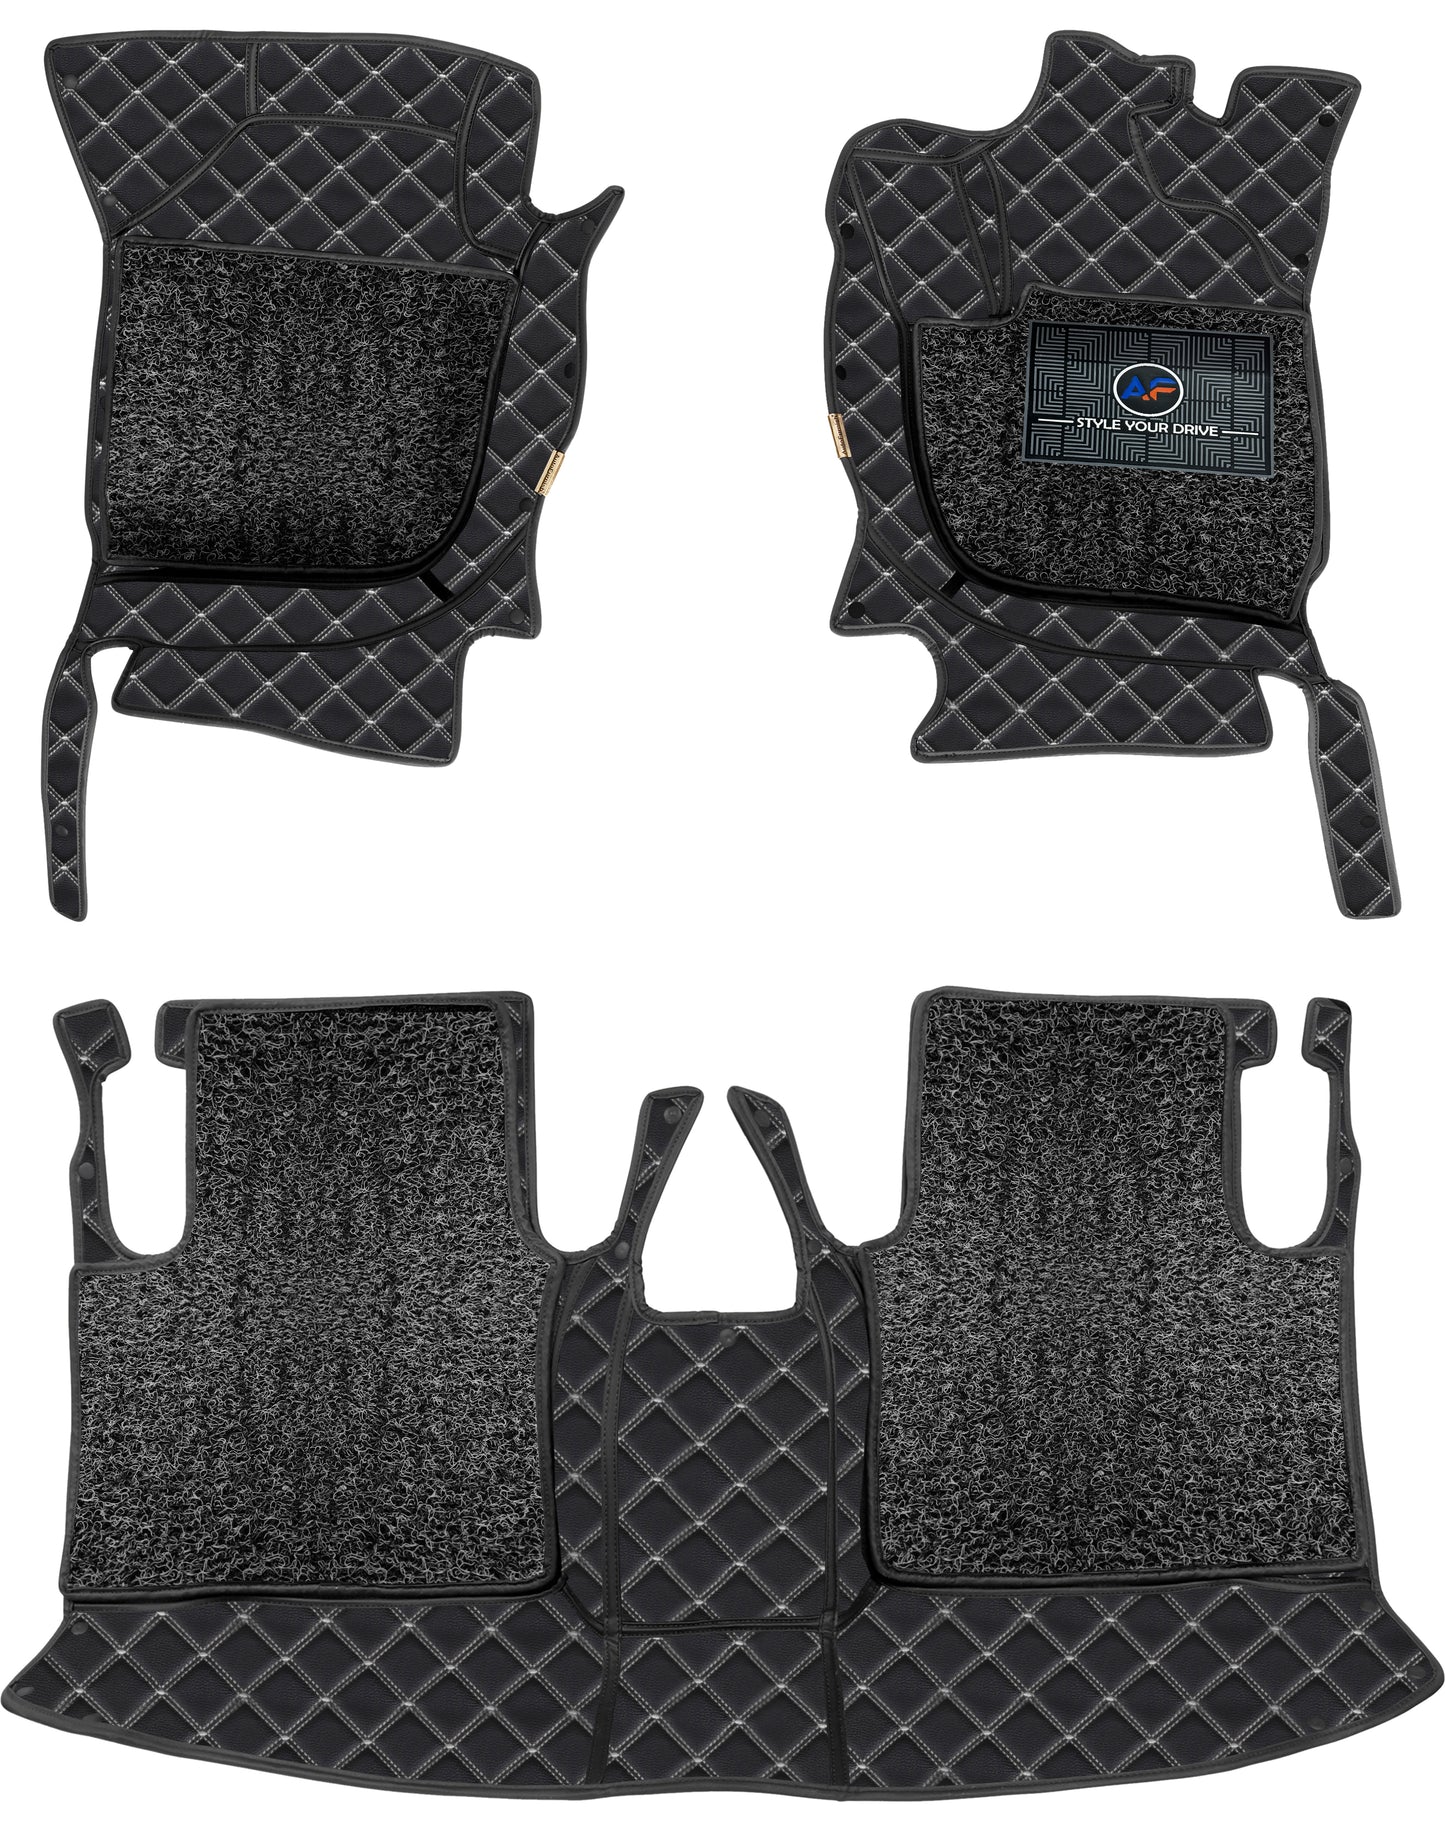 Mahindra Thar 2014-19-7D Luxury Car Mat, All Weather Proof, Anti-Skid, 100% Waterproof & Odorless with Unique Diamond Fish Design (24mm Luxury PU Leather, 2 Rows)